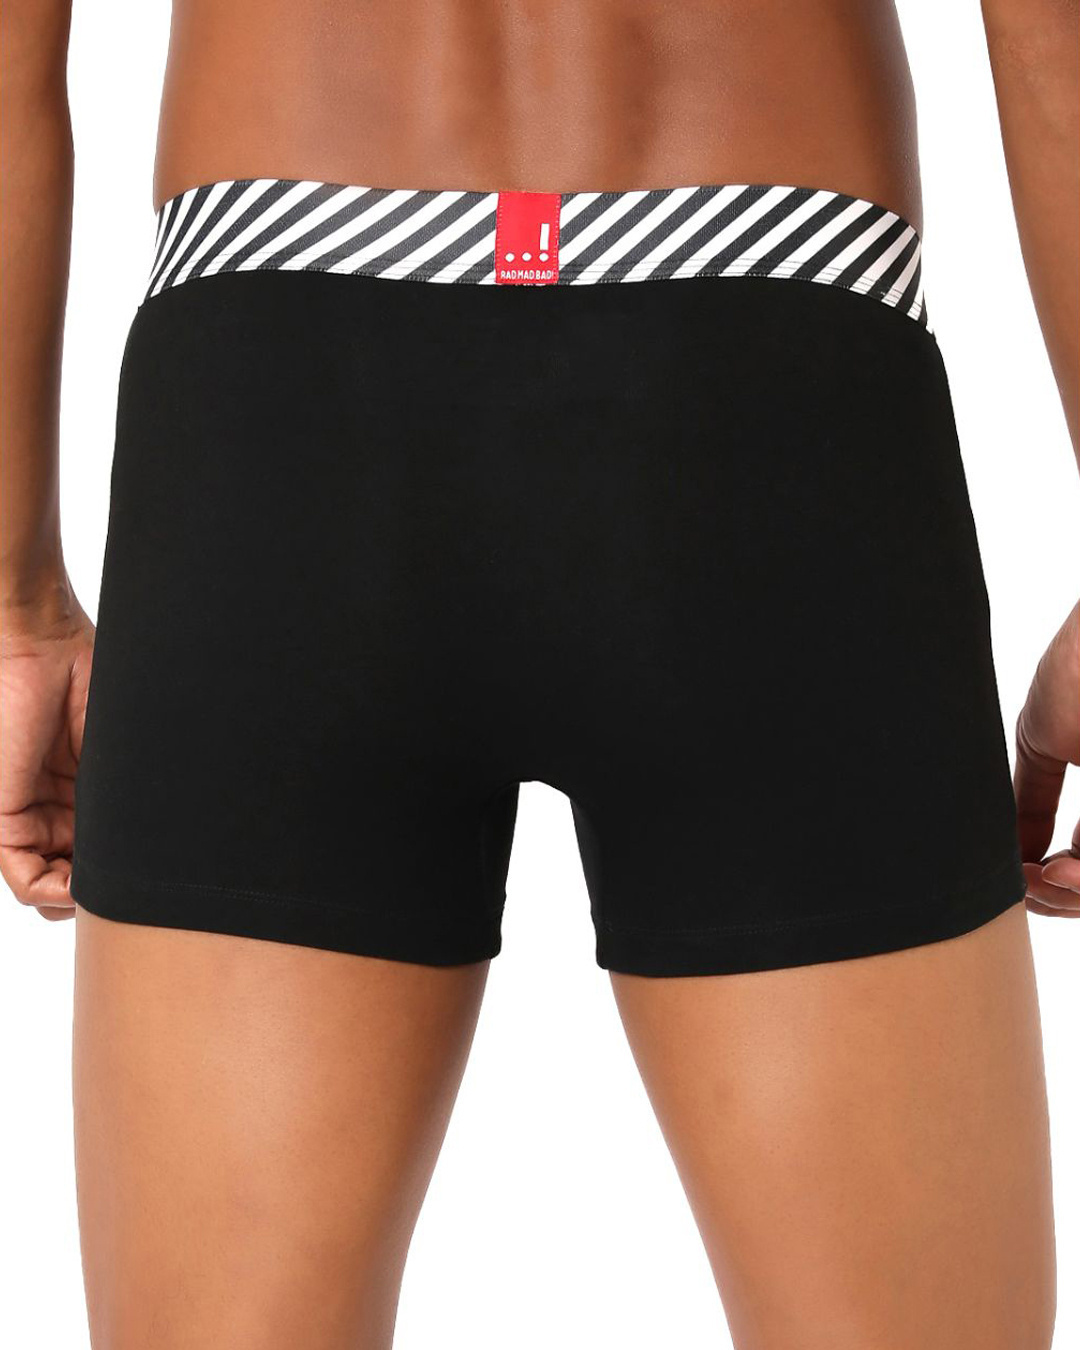 Shop Pack of 2 Men's Black & White Graphic Printed Cotton Trunks-Back